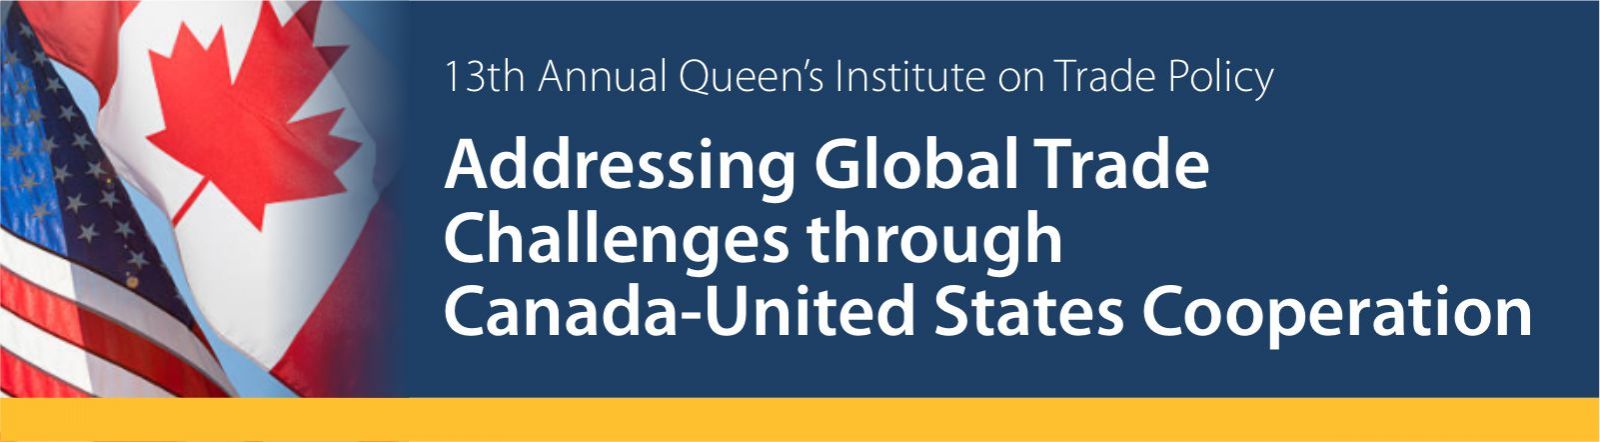 Cover image. text reads thirteenth annual queen's institute on trade policy - addressing global trade challenges through Canada-United States cooperation